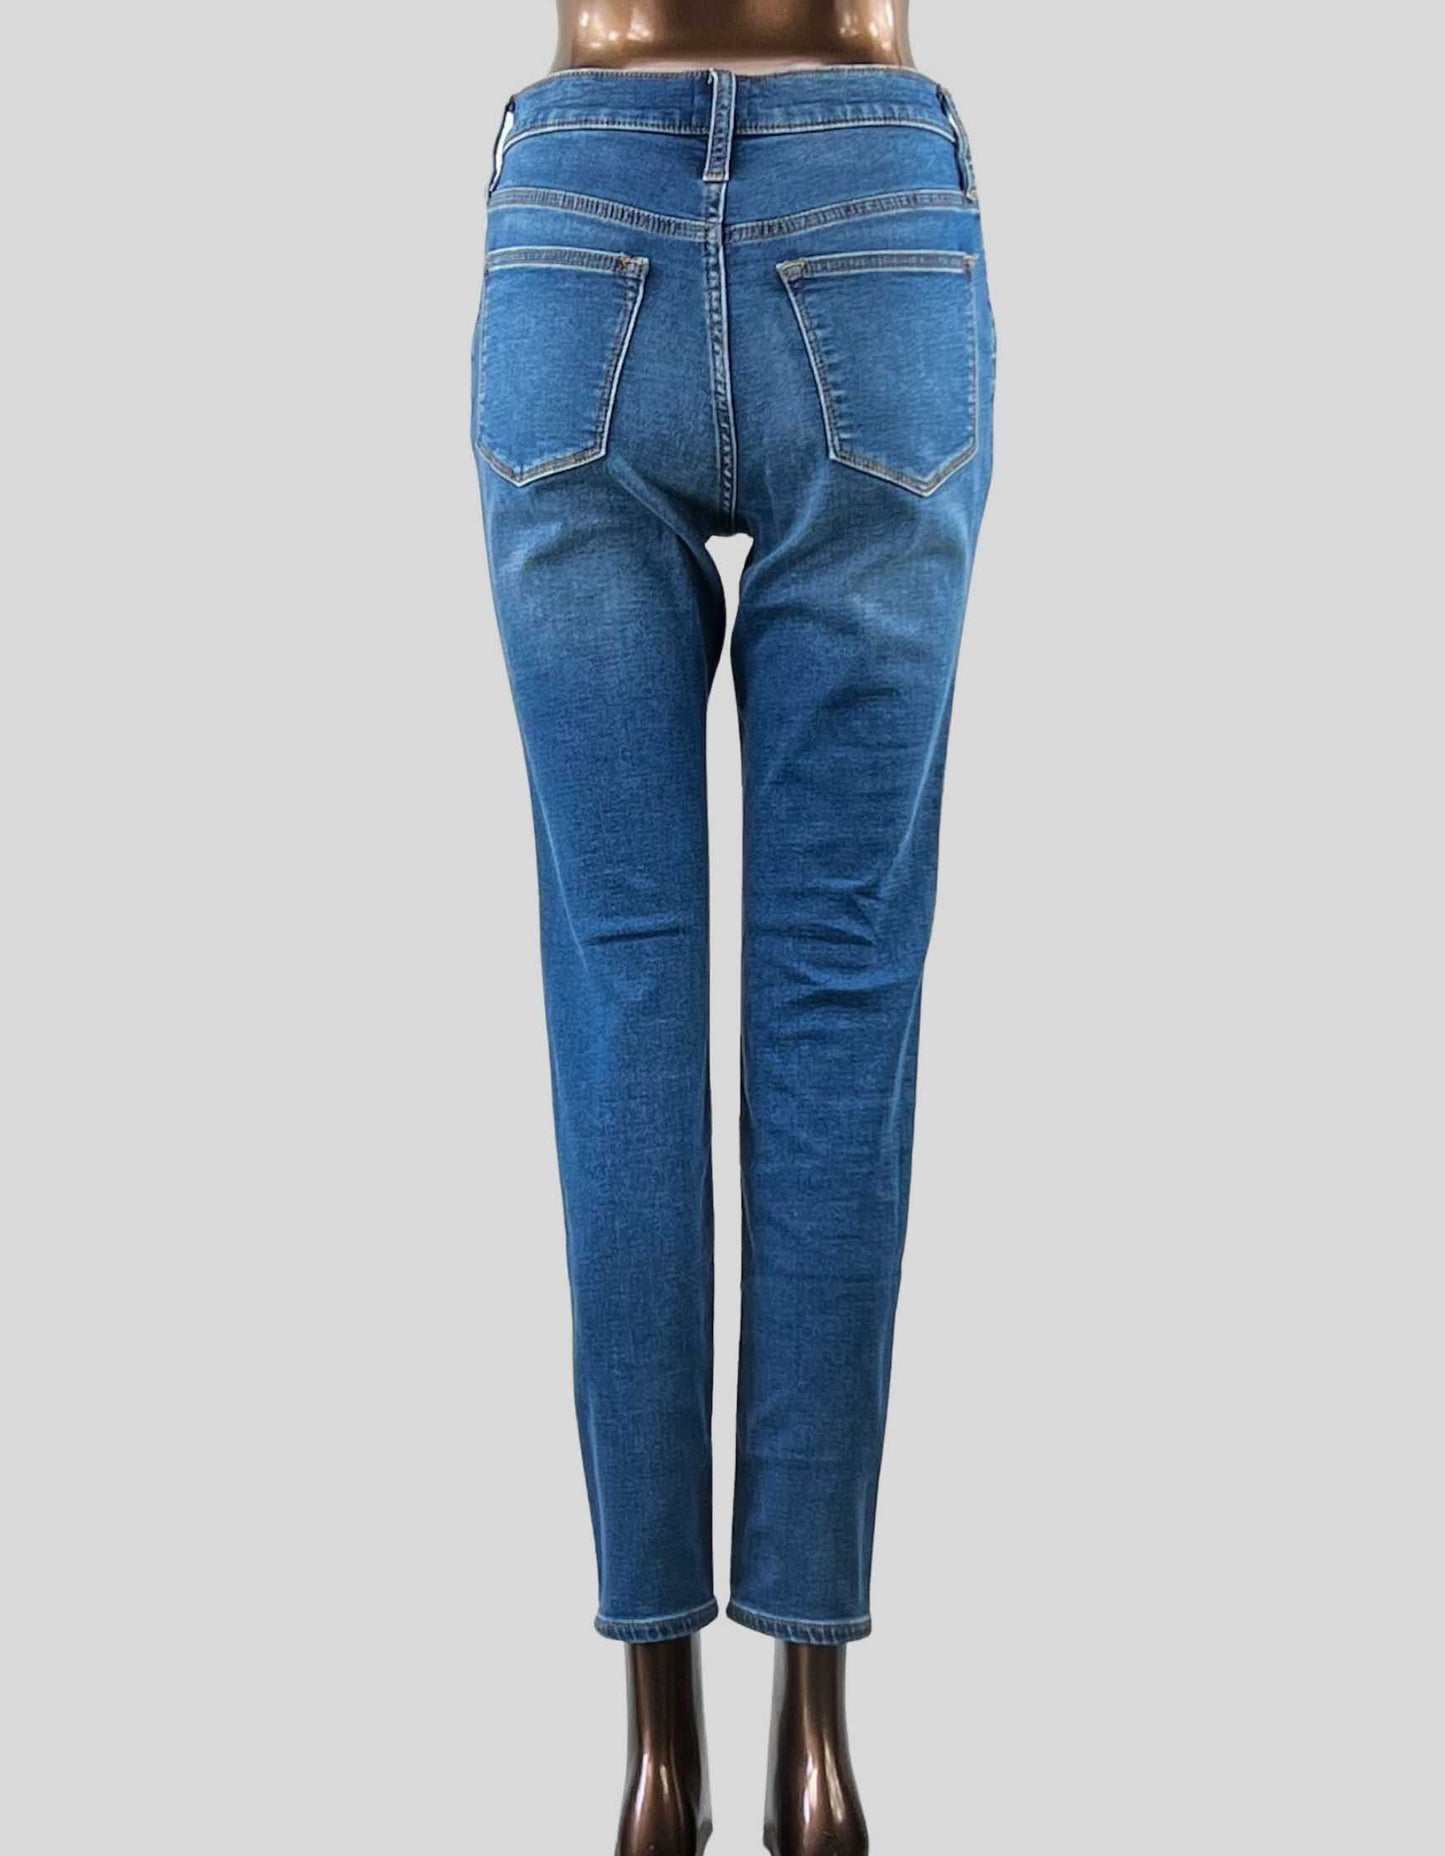 J. Crew Factory 9" Mid-Rise Skinny Jeans - 27 US